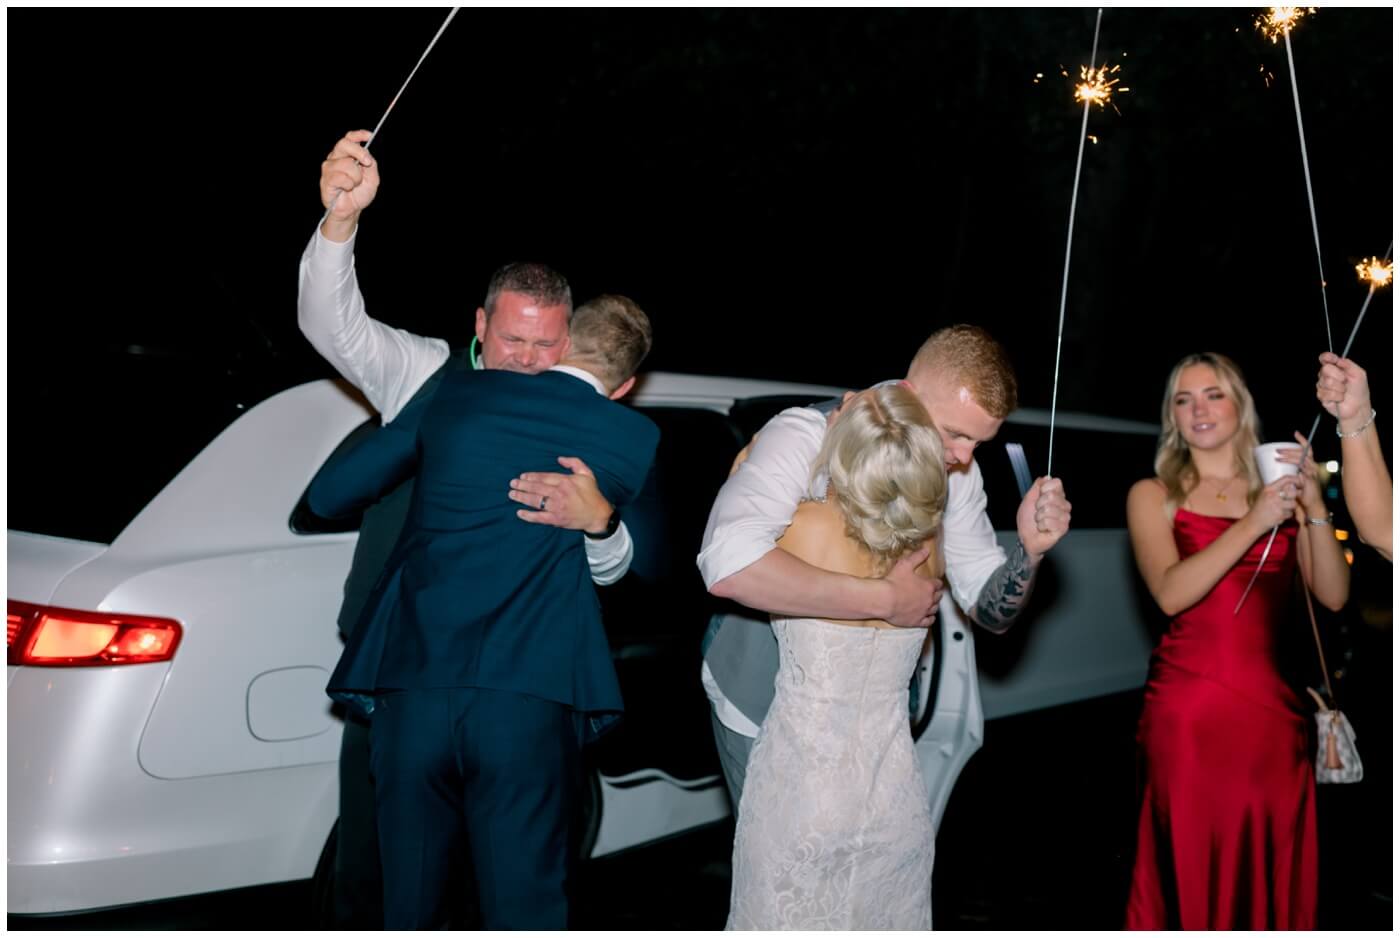 the bride and groom cry as they hug their family at the end of the night 